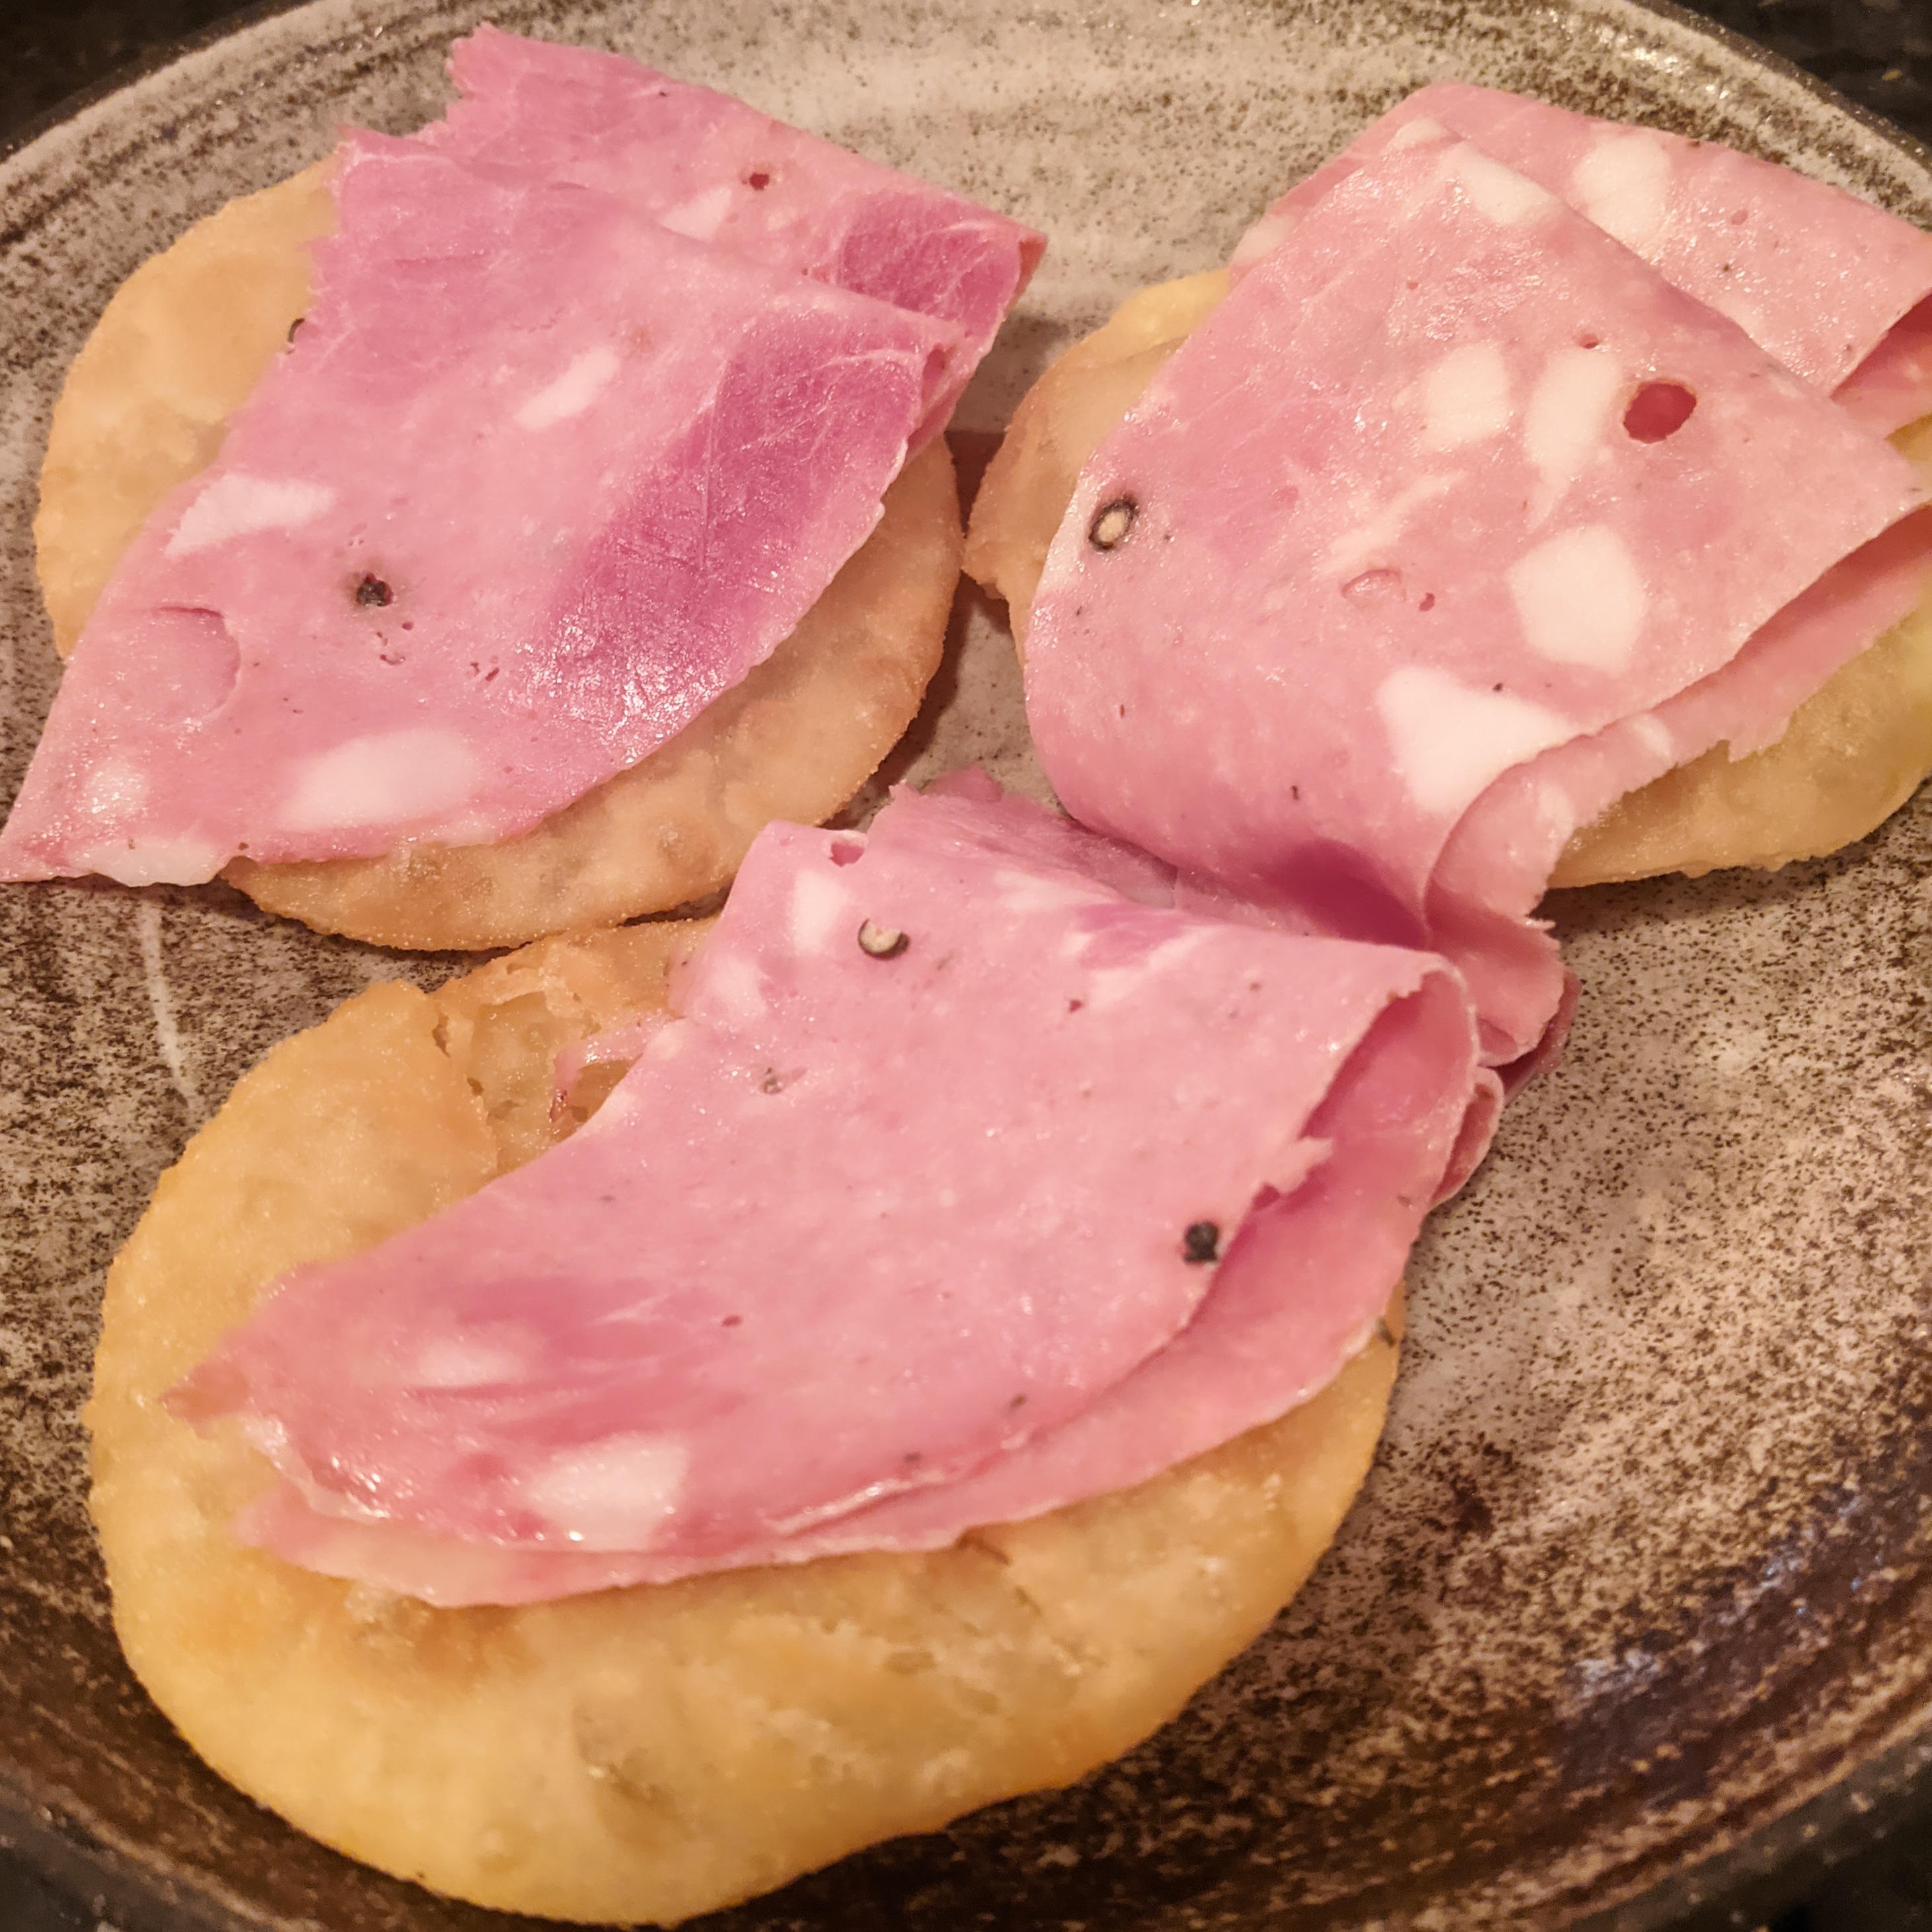 three pieces of mortadella topped gnocco fritto at Ombra, one of london's best and most authentic italian restaurants